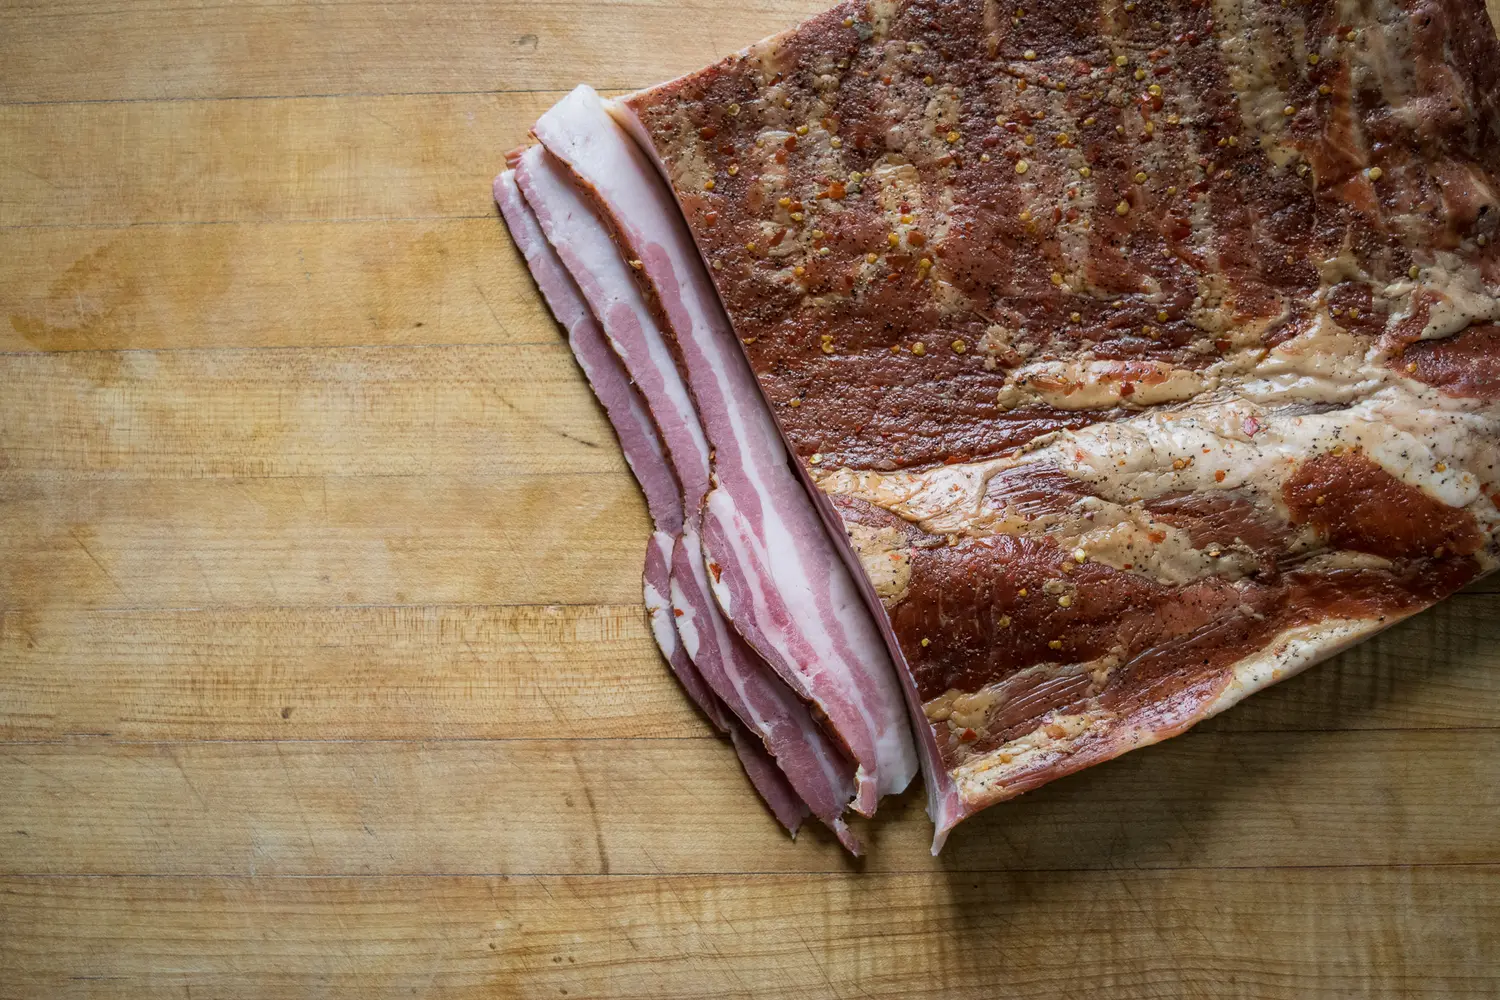 smoked fatback - What is another name for fatback meat